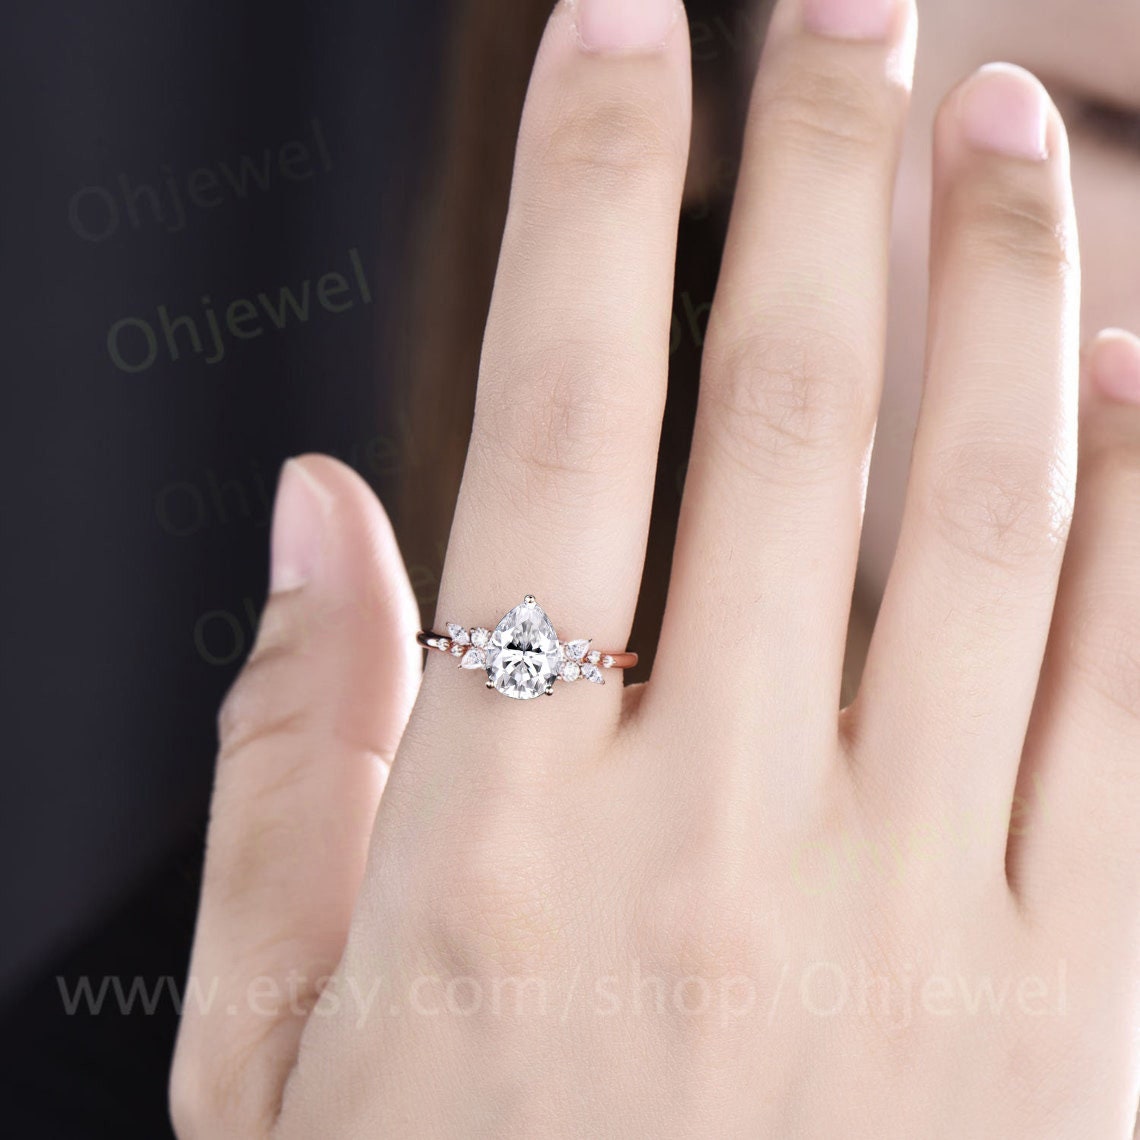 Unique pear shaped moissanite engagement ring solid 14k rose gold cluster snowdrift diamond bridal promise wedding anniversary ring women